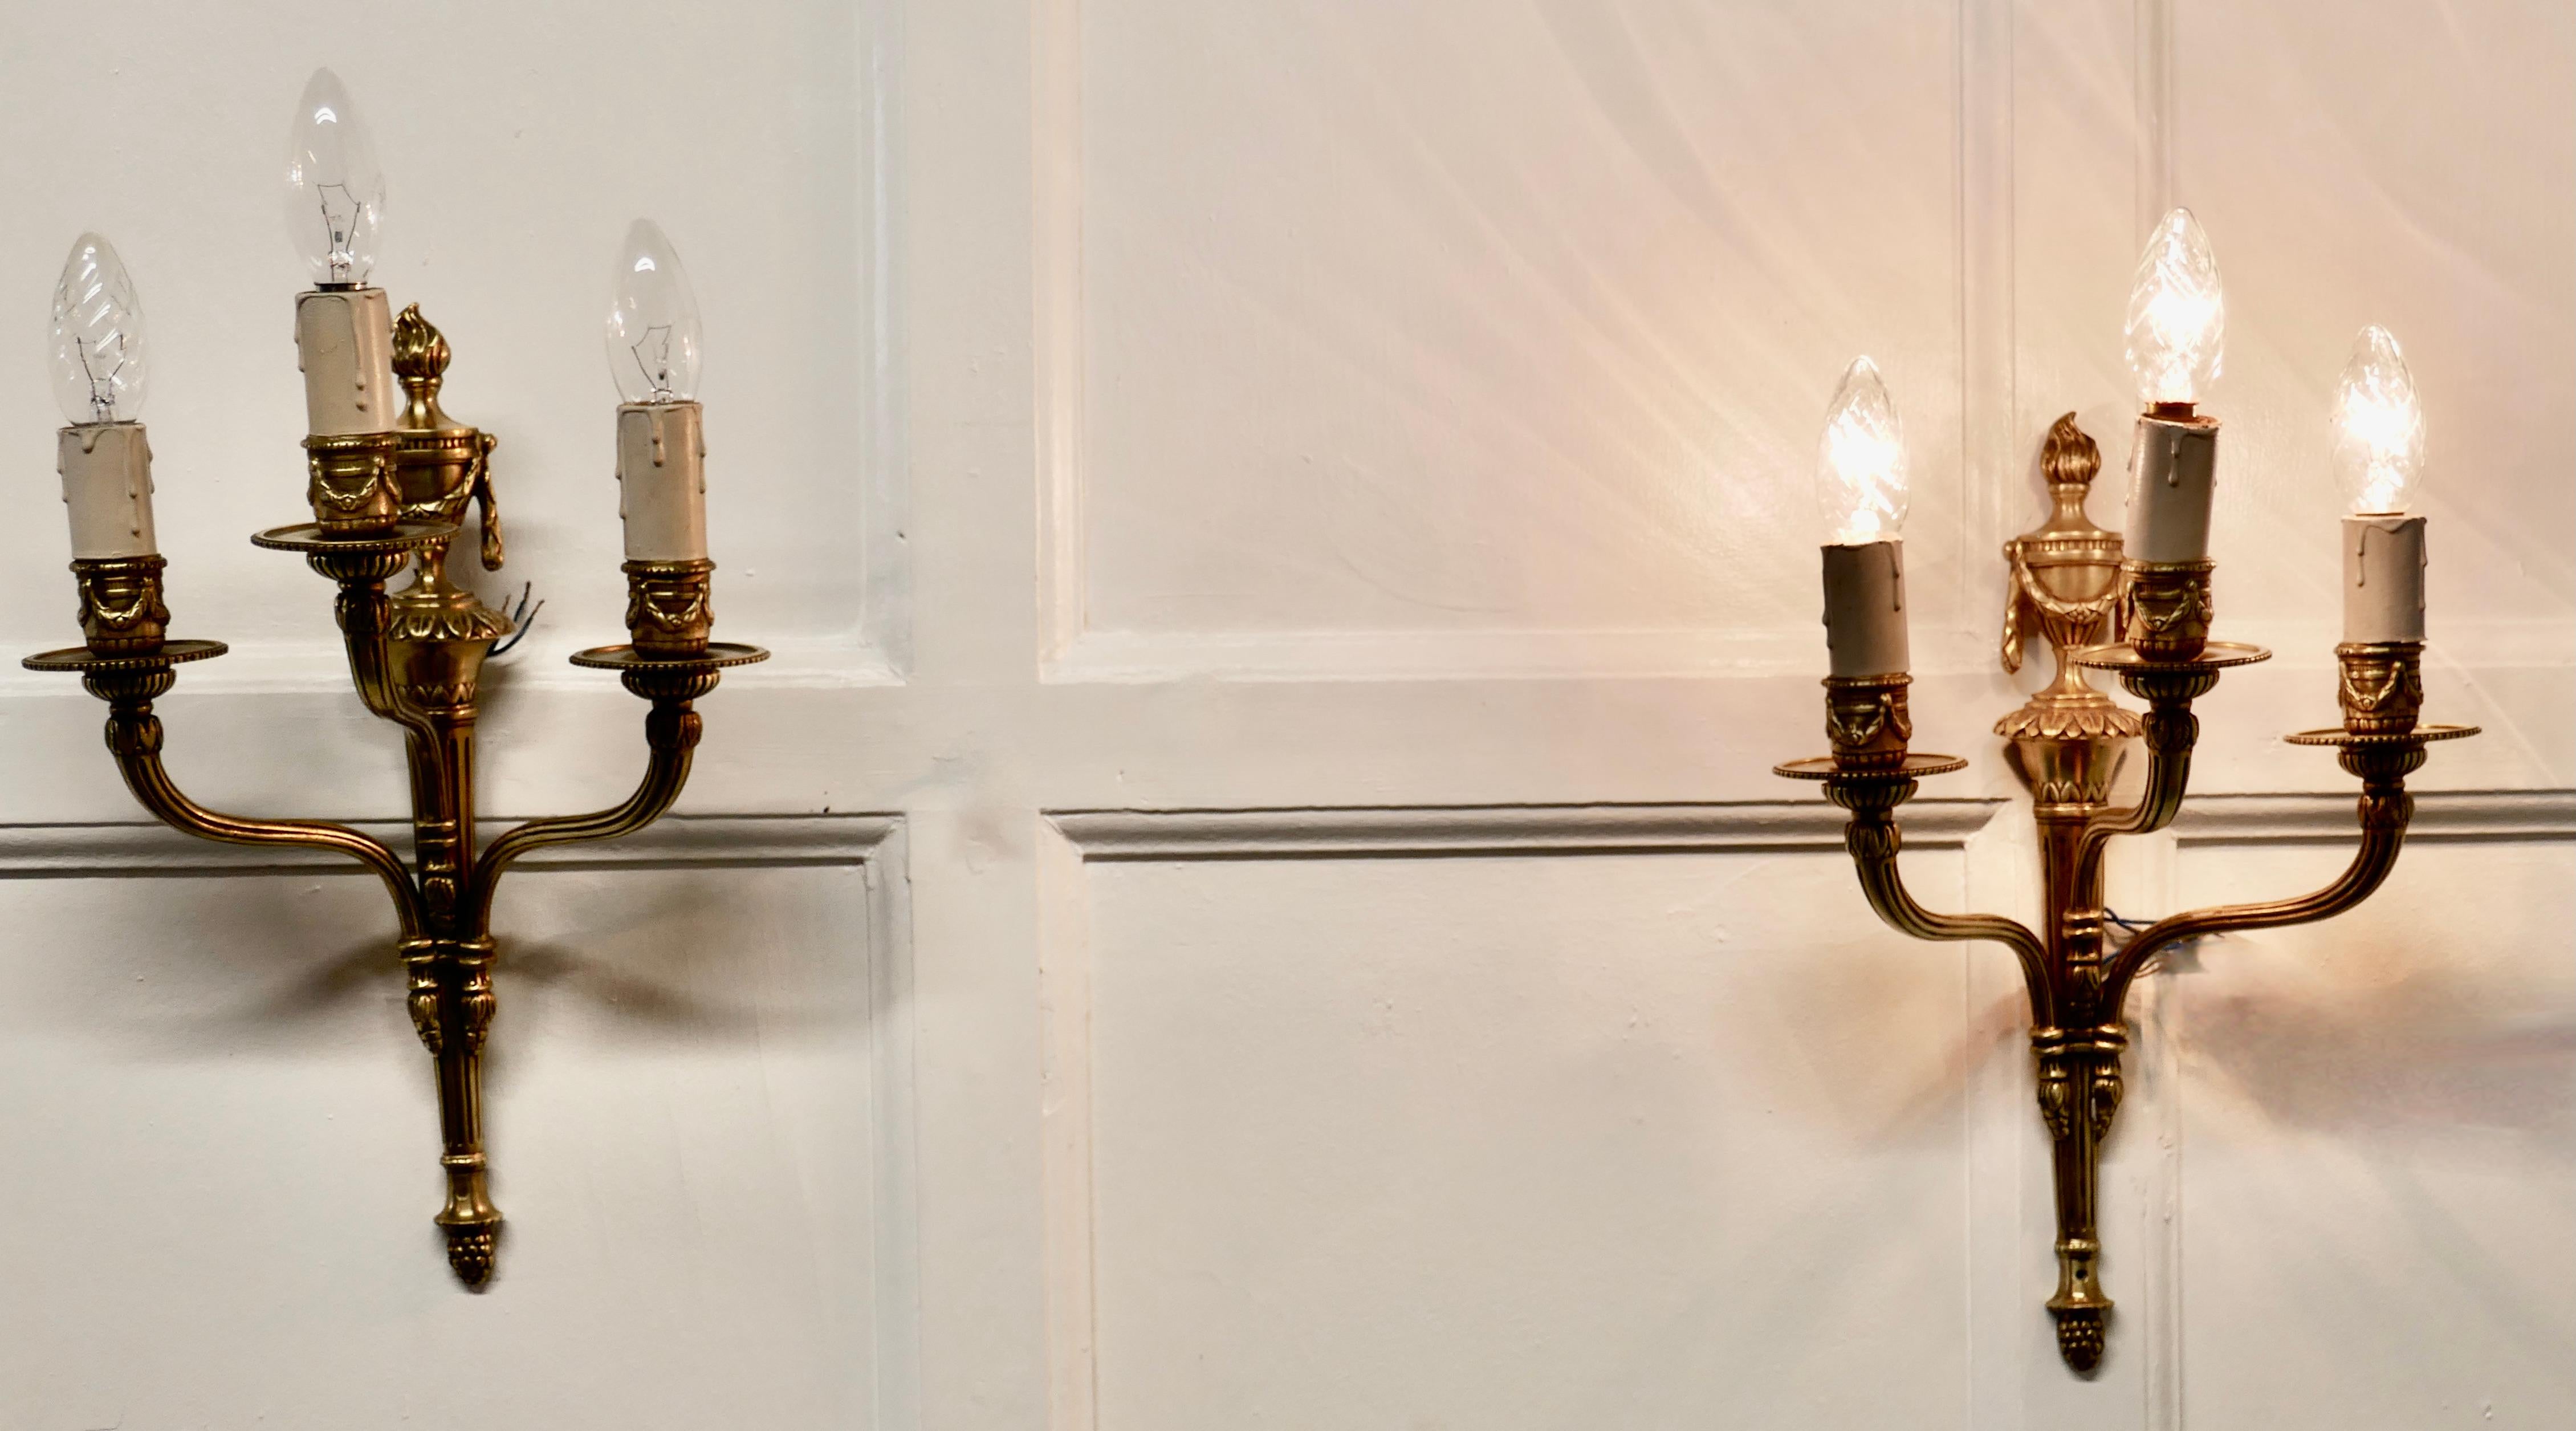 Pair of French neoclassical brass triple wall lights


A very handsome pair of brass wall lights, the lights are in the classical style of a lighted torch
Each light has 3 branches each with a sconce and candle tube
The lights have been